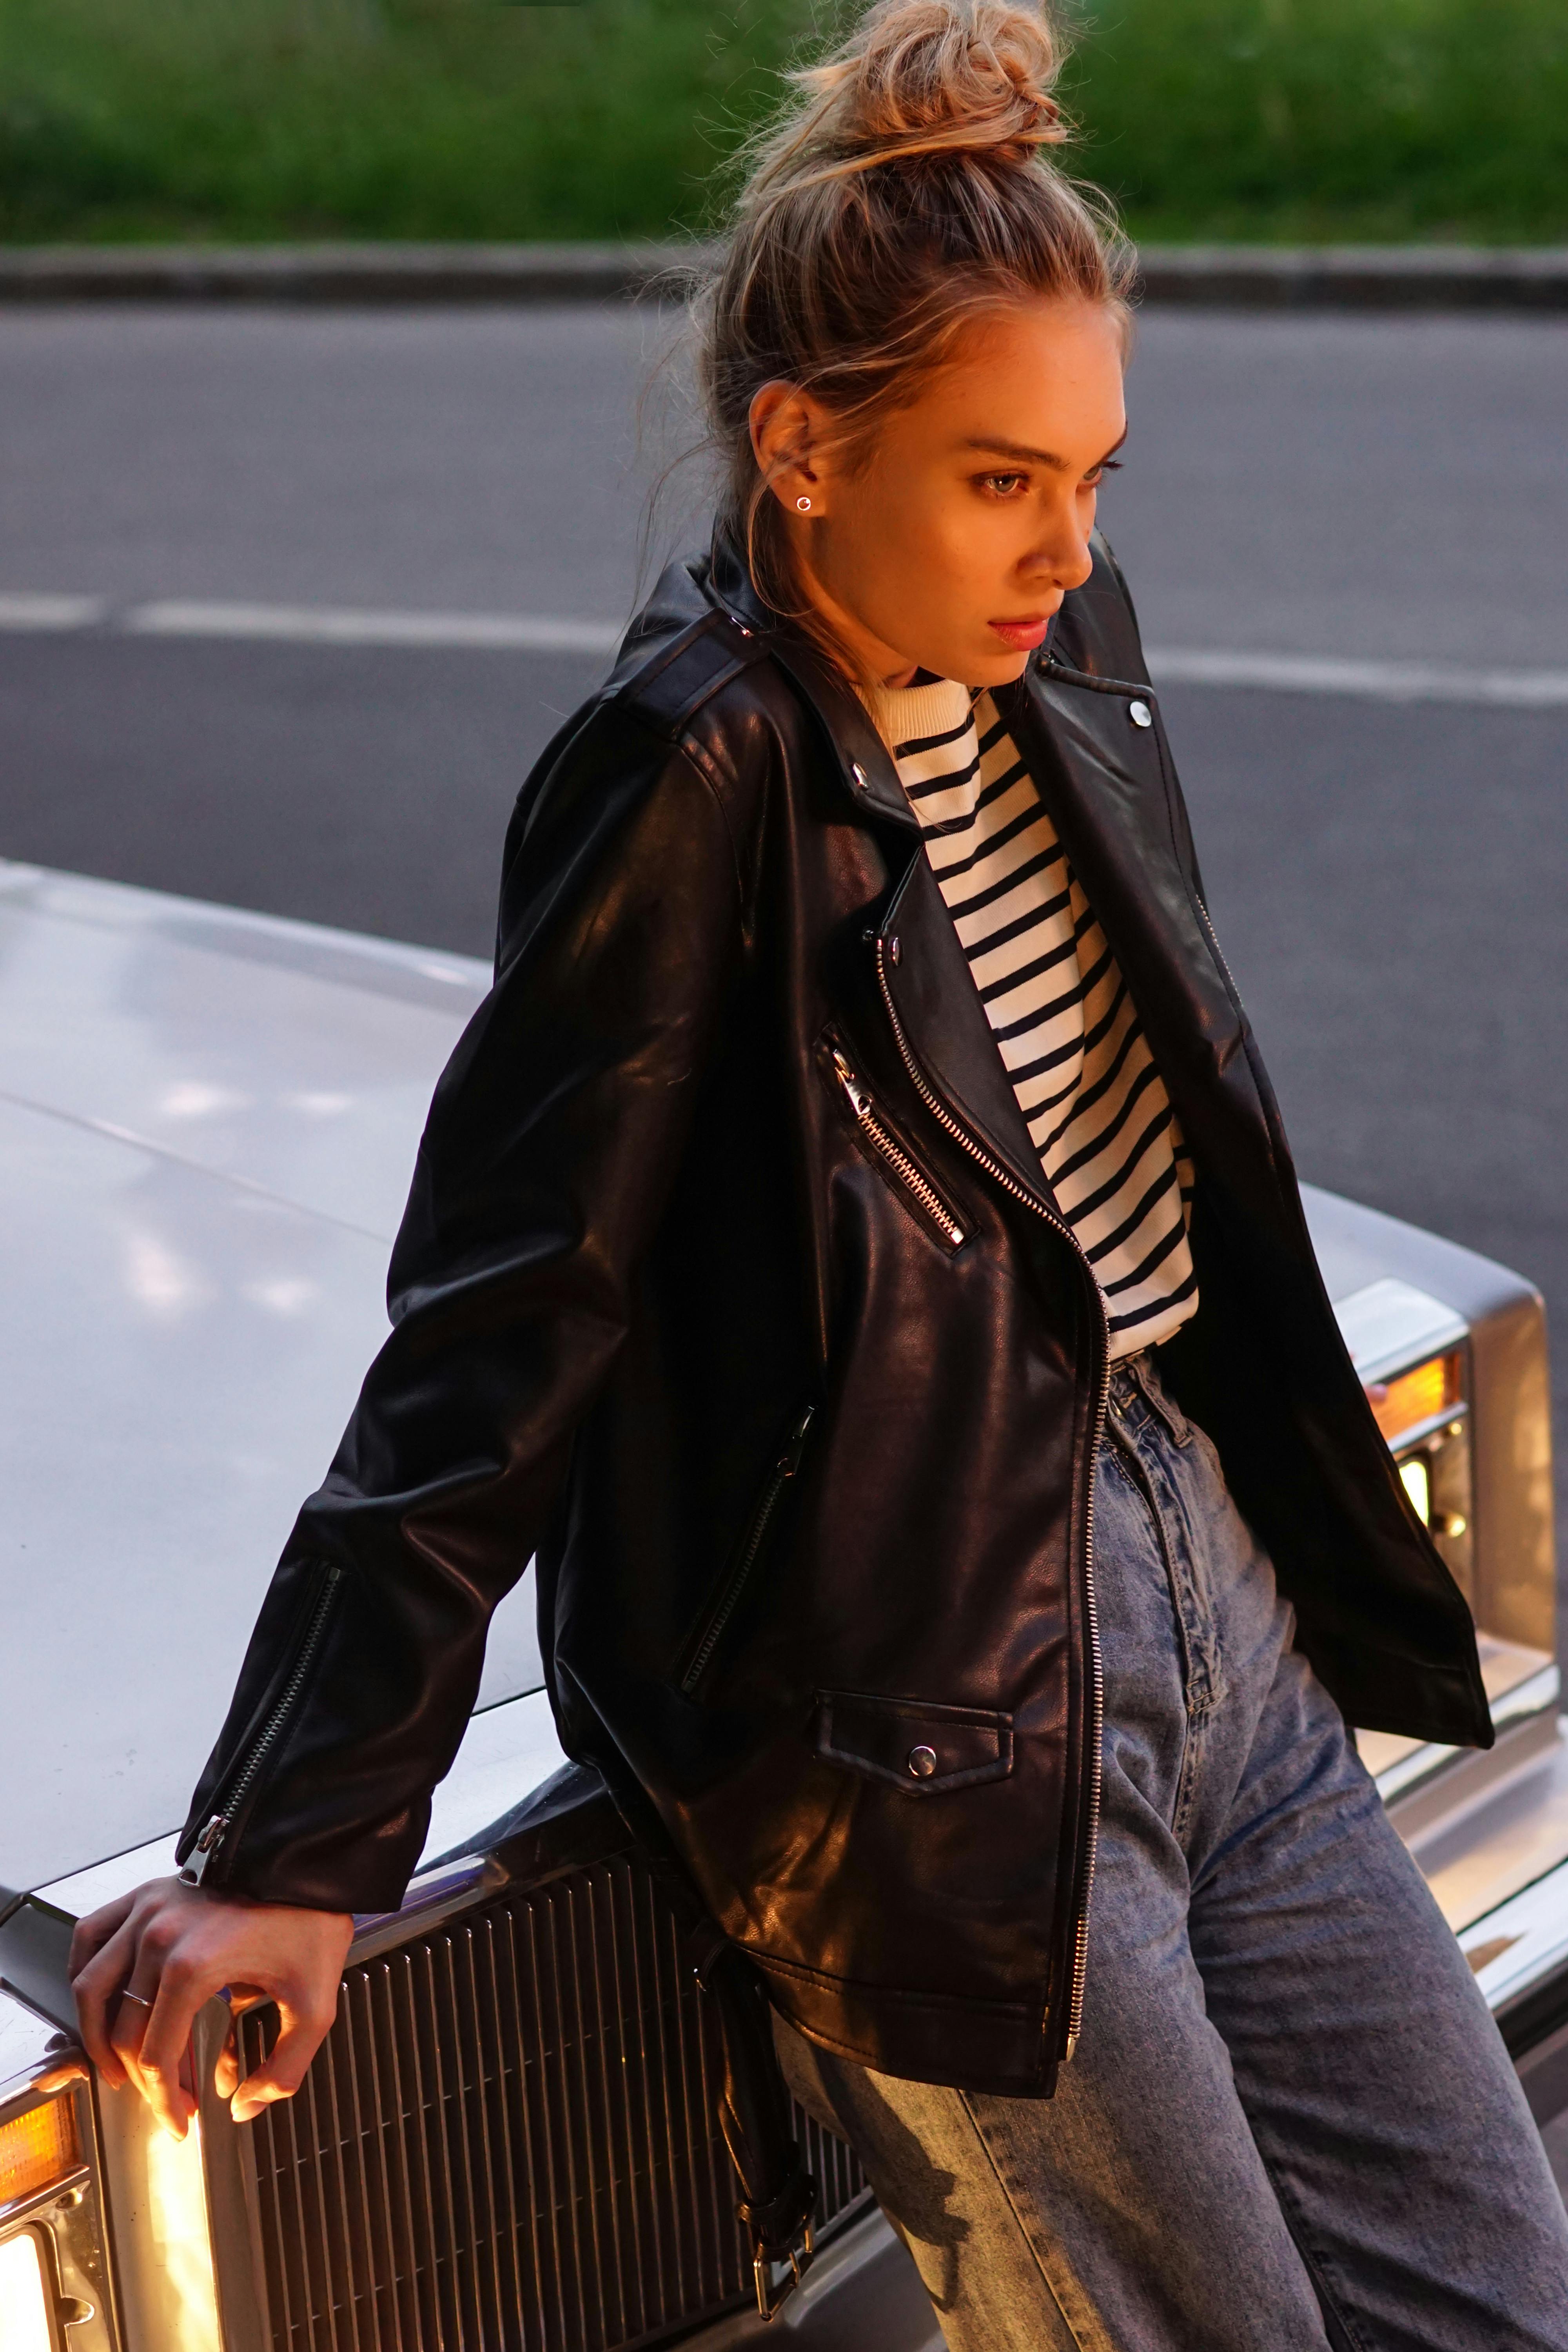 woman wearing a black leather jacket and striped shirt